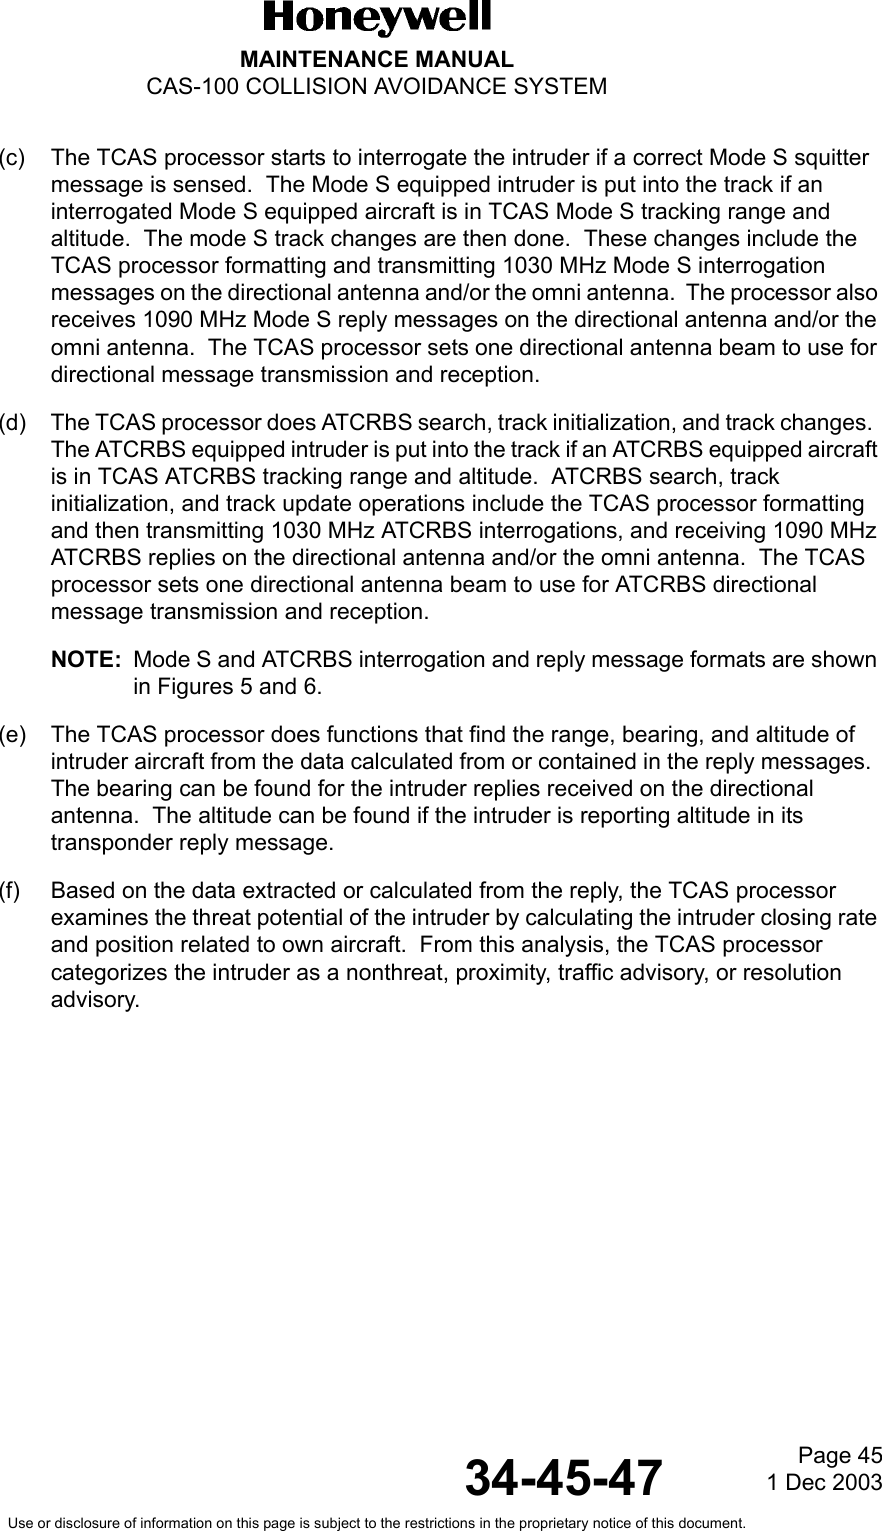 Page 451 Dec 200334-45-47MAINTENANCE MANUALCAS-100 COLLISION AVOIDANCE SYSTEMUse or disclosure of information on this page is subject to the restrictions in the proprietary notice of this document.(c) The TCAS processor starts to interrogate the intruder if a correct Mode S squitter message is sensed.  The Mode S equipped intruder is put into the track if an interrogated Mode S equipped aircraft is in TCAS Mode S tracking range and altitude.  The mode S track changes are then done.  These changes include the TCAS processor formatting and transmitting 1030 MHz Mode S interrogation messages on the directional antenna and/or the omni antenna.  The processor also receives 1090 MHz Mode S reply messages on the directional antenna and/or the omni antenna.  The TCAS processor sets one directional antenna beam to use for directional message transmission and reception.(d) The TCAS processor does ATCRBS search, track initialization, and track changes.  The ATCRBS equipped intruder is put into the track if an ATCRBS equipped aircraft is in TCAS ATCRBS tracking range and altitude.  ATCRBS search, track initialization, and track update operations include the TCAS processor formatting and then transmitting 1030 MHz ATCRBS interrogations, and receiving 1090 MHz ATCRBS replies on the directional antenna and/or the omni antenna.  The TCAS processor sets one directional antenna beam to use for ATCRBS directional message transmission and reception. NOTE: Mode S and ATCRBS interrogation and reply message formats are shown in Figures 5 and 6.(e) The TCAS processor does functions that find the range, bearing, and altitude of intruder aircraft from the data calculated from or contained in the reply messages.  The bearing can be found for the intruder replies received on the directional antenna.  The altitude can be found if the intruder is reporting altitude in its transponder reply message.(f) Based on the data extracted or calculated from the reply, the TCAS processor examines the threat potential of the intruder by calculating the intruder closing rate and position related to own aircraft.  From this analysis, the TCAS processor categorizes the intruder as a nonthreat, proximity, traffic advisory, or resolution advisory.